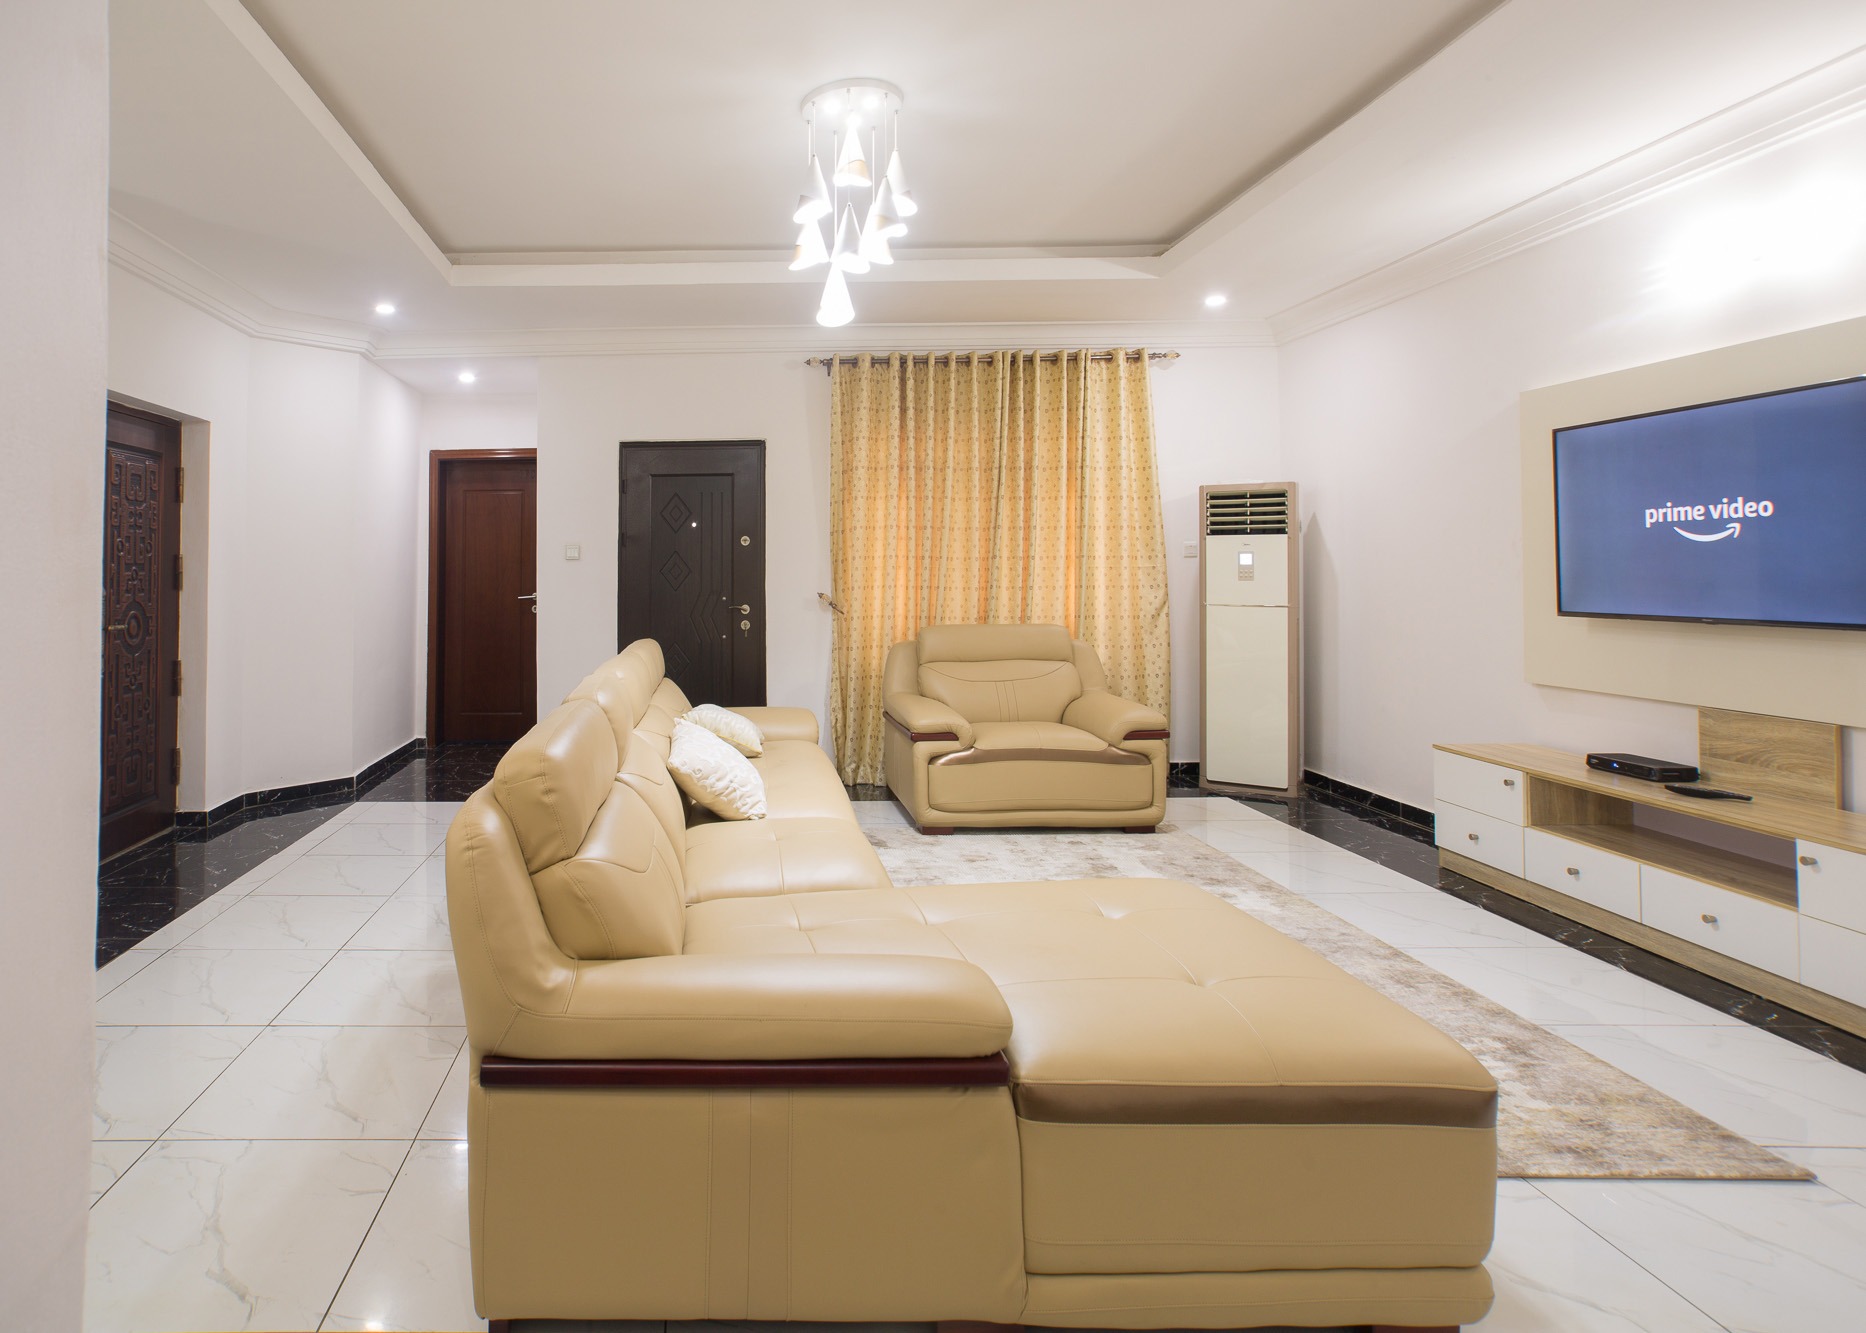 3 bedroom short stay apartment available in Wuse II